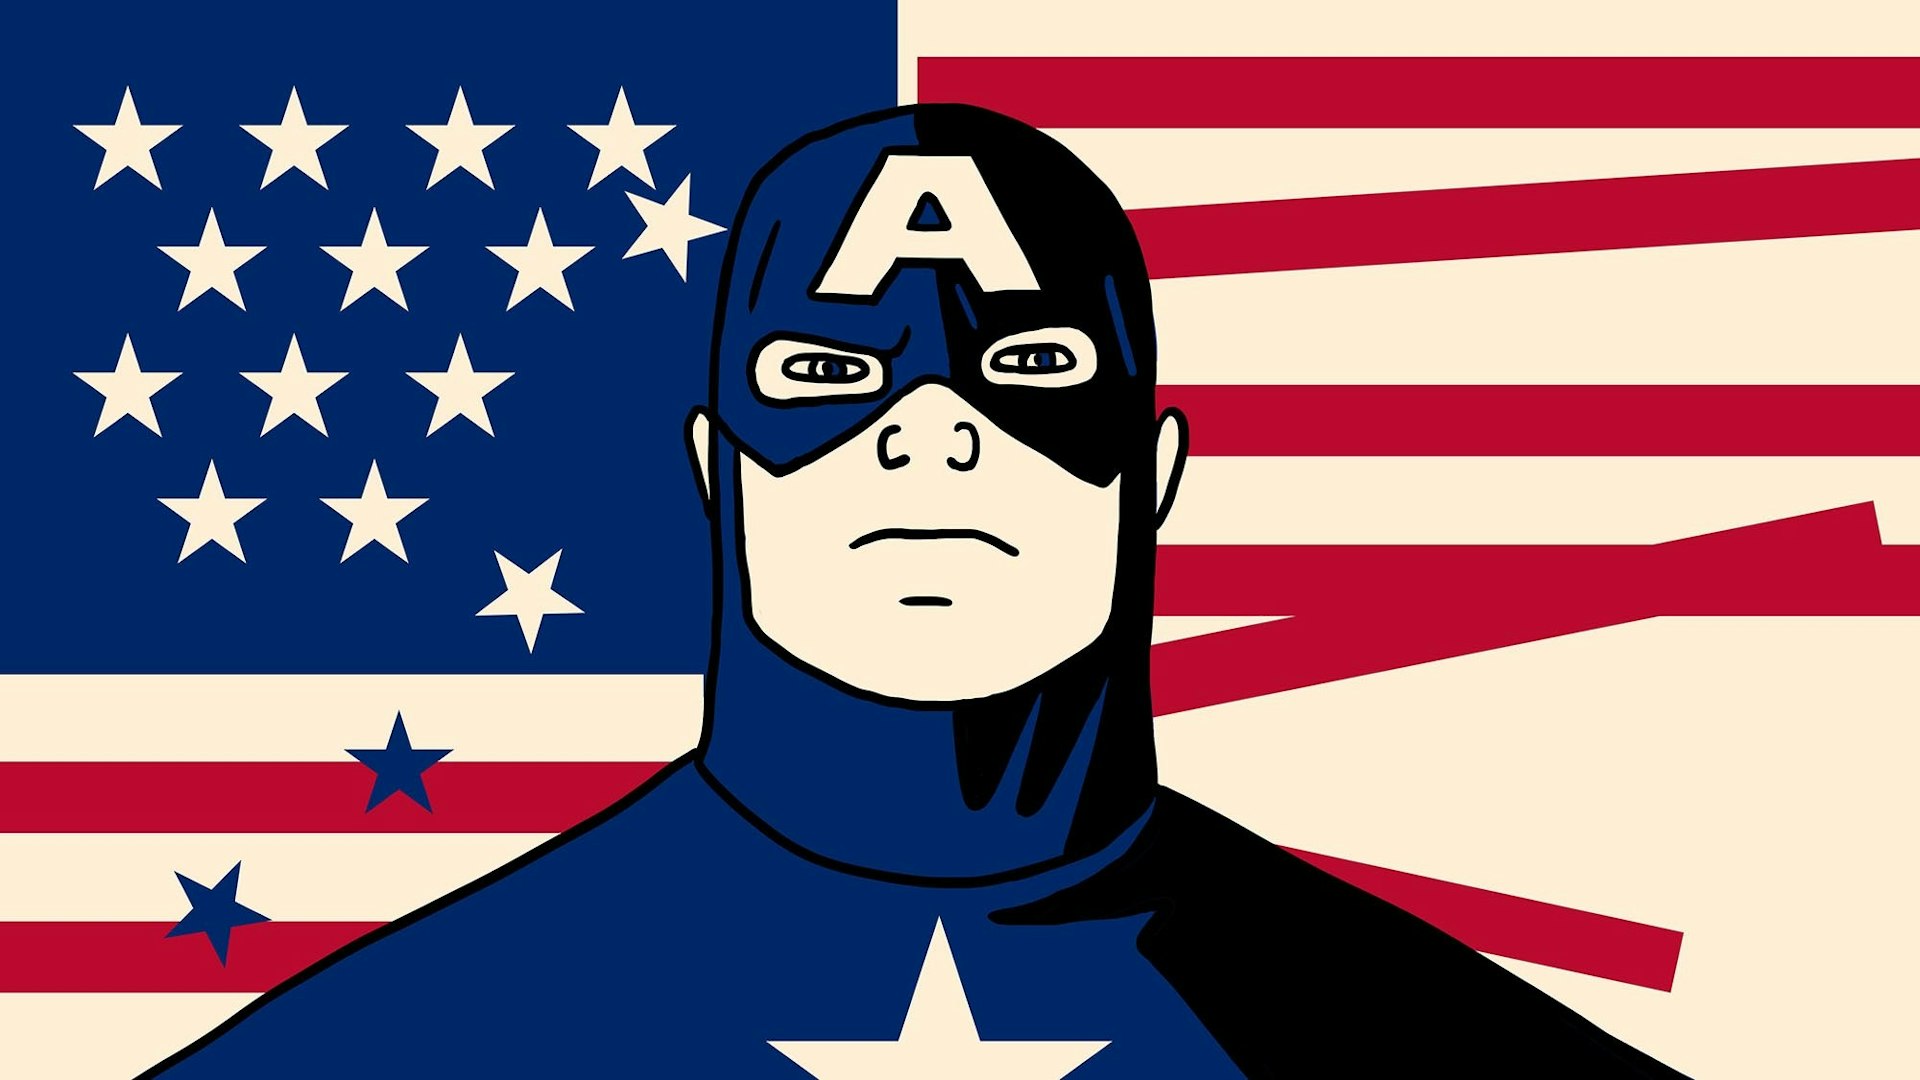 What can Captain America teach us about the state of US politics?